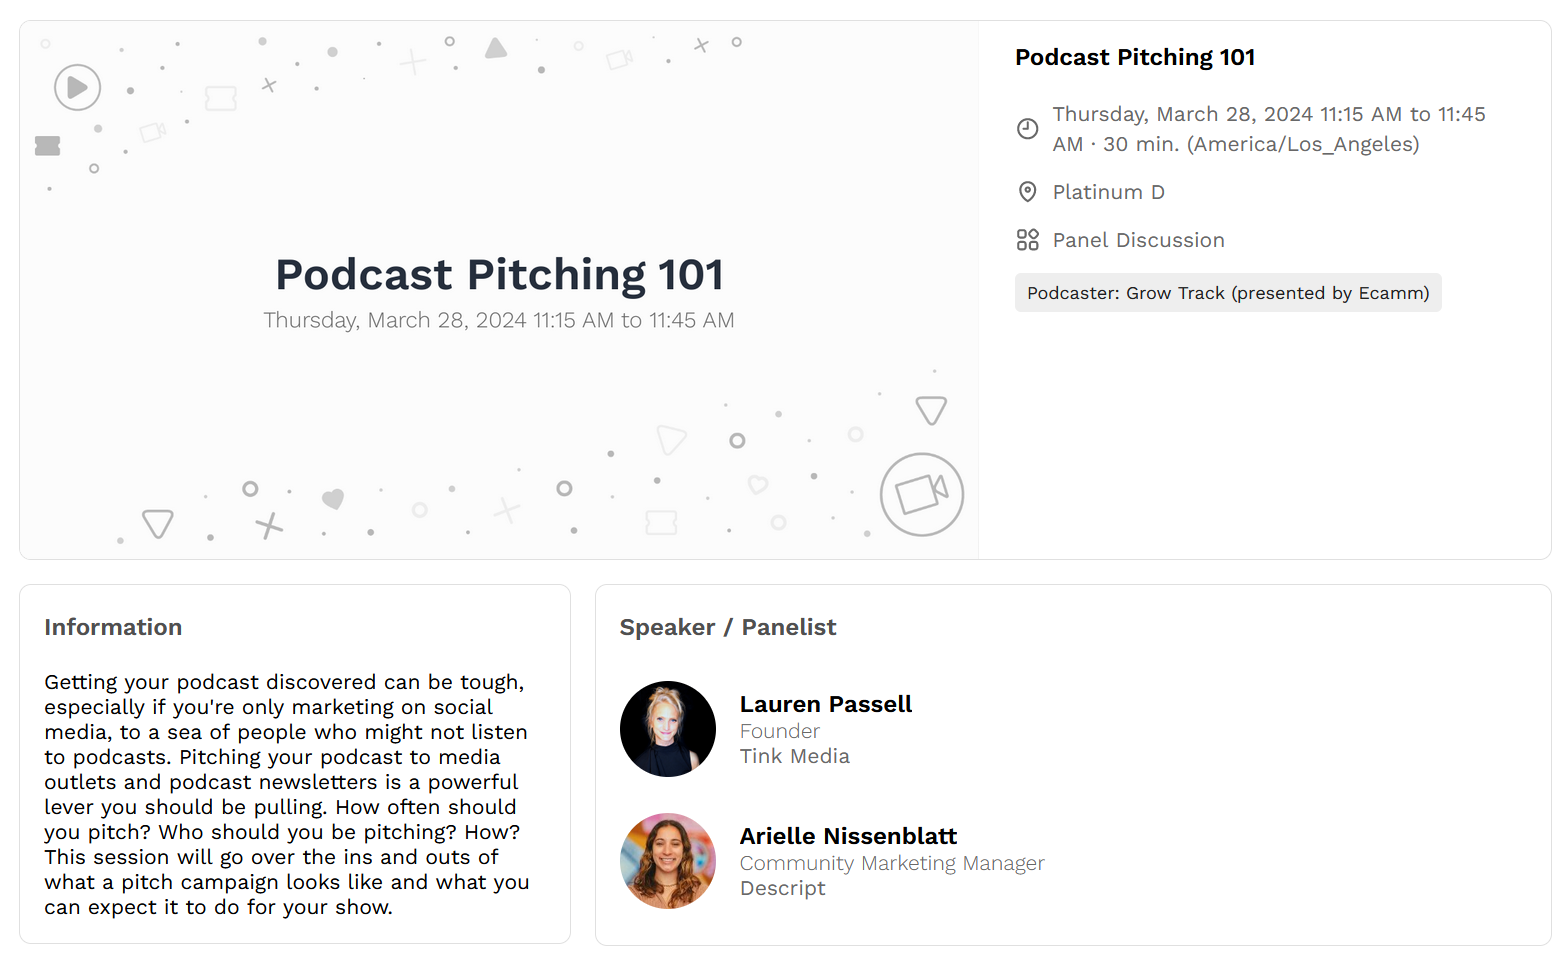 Pitching to Podcast Newsletter